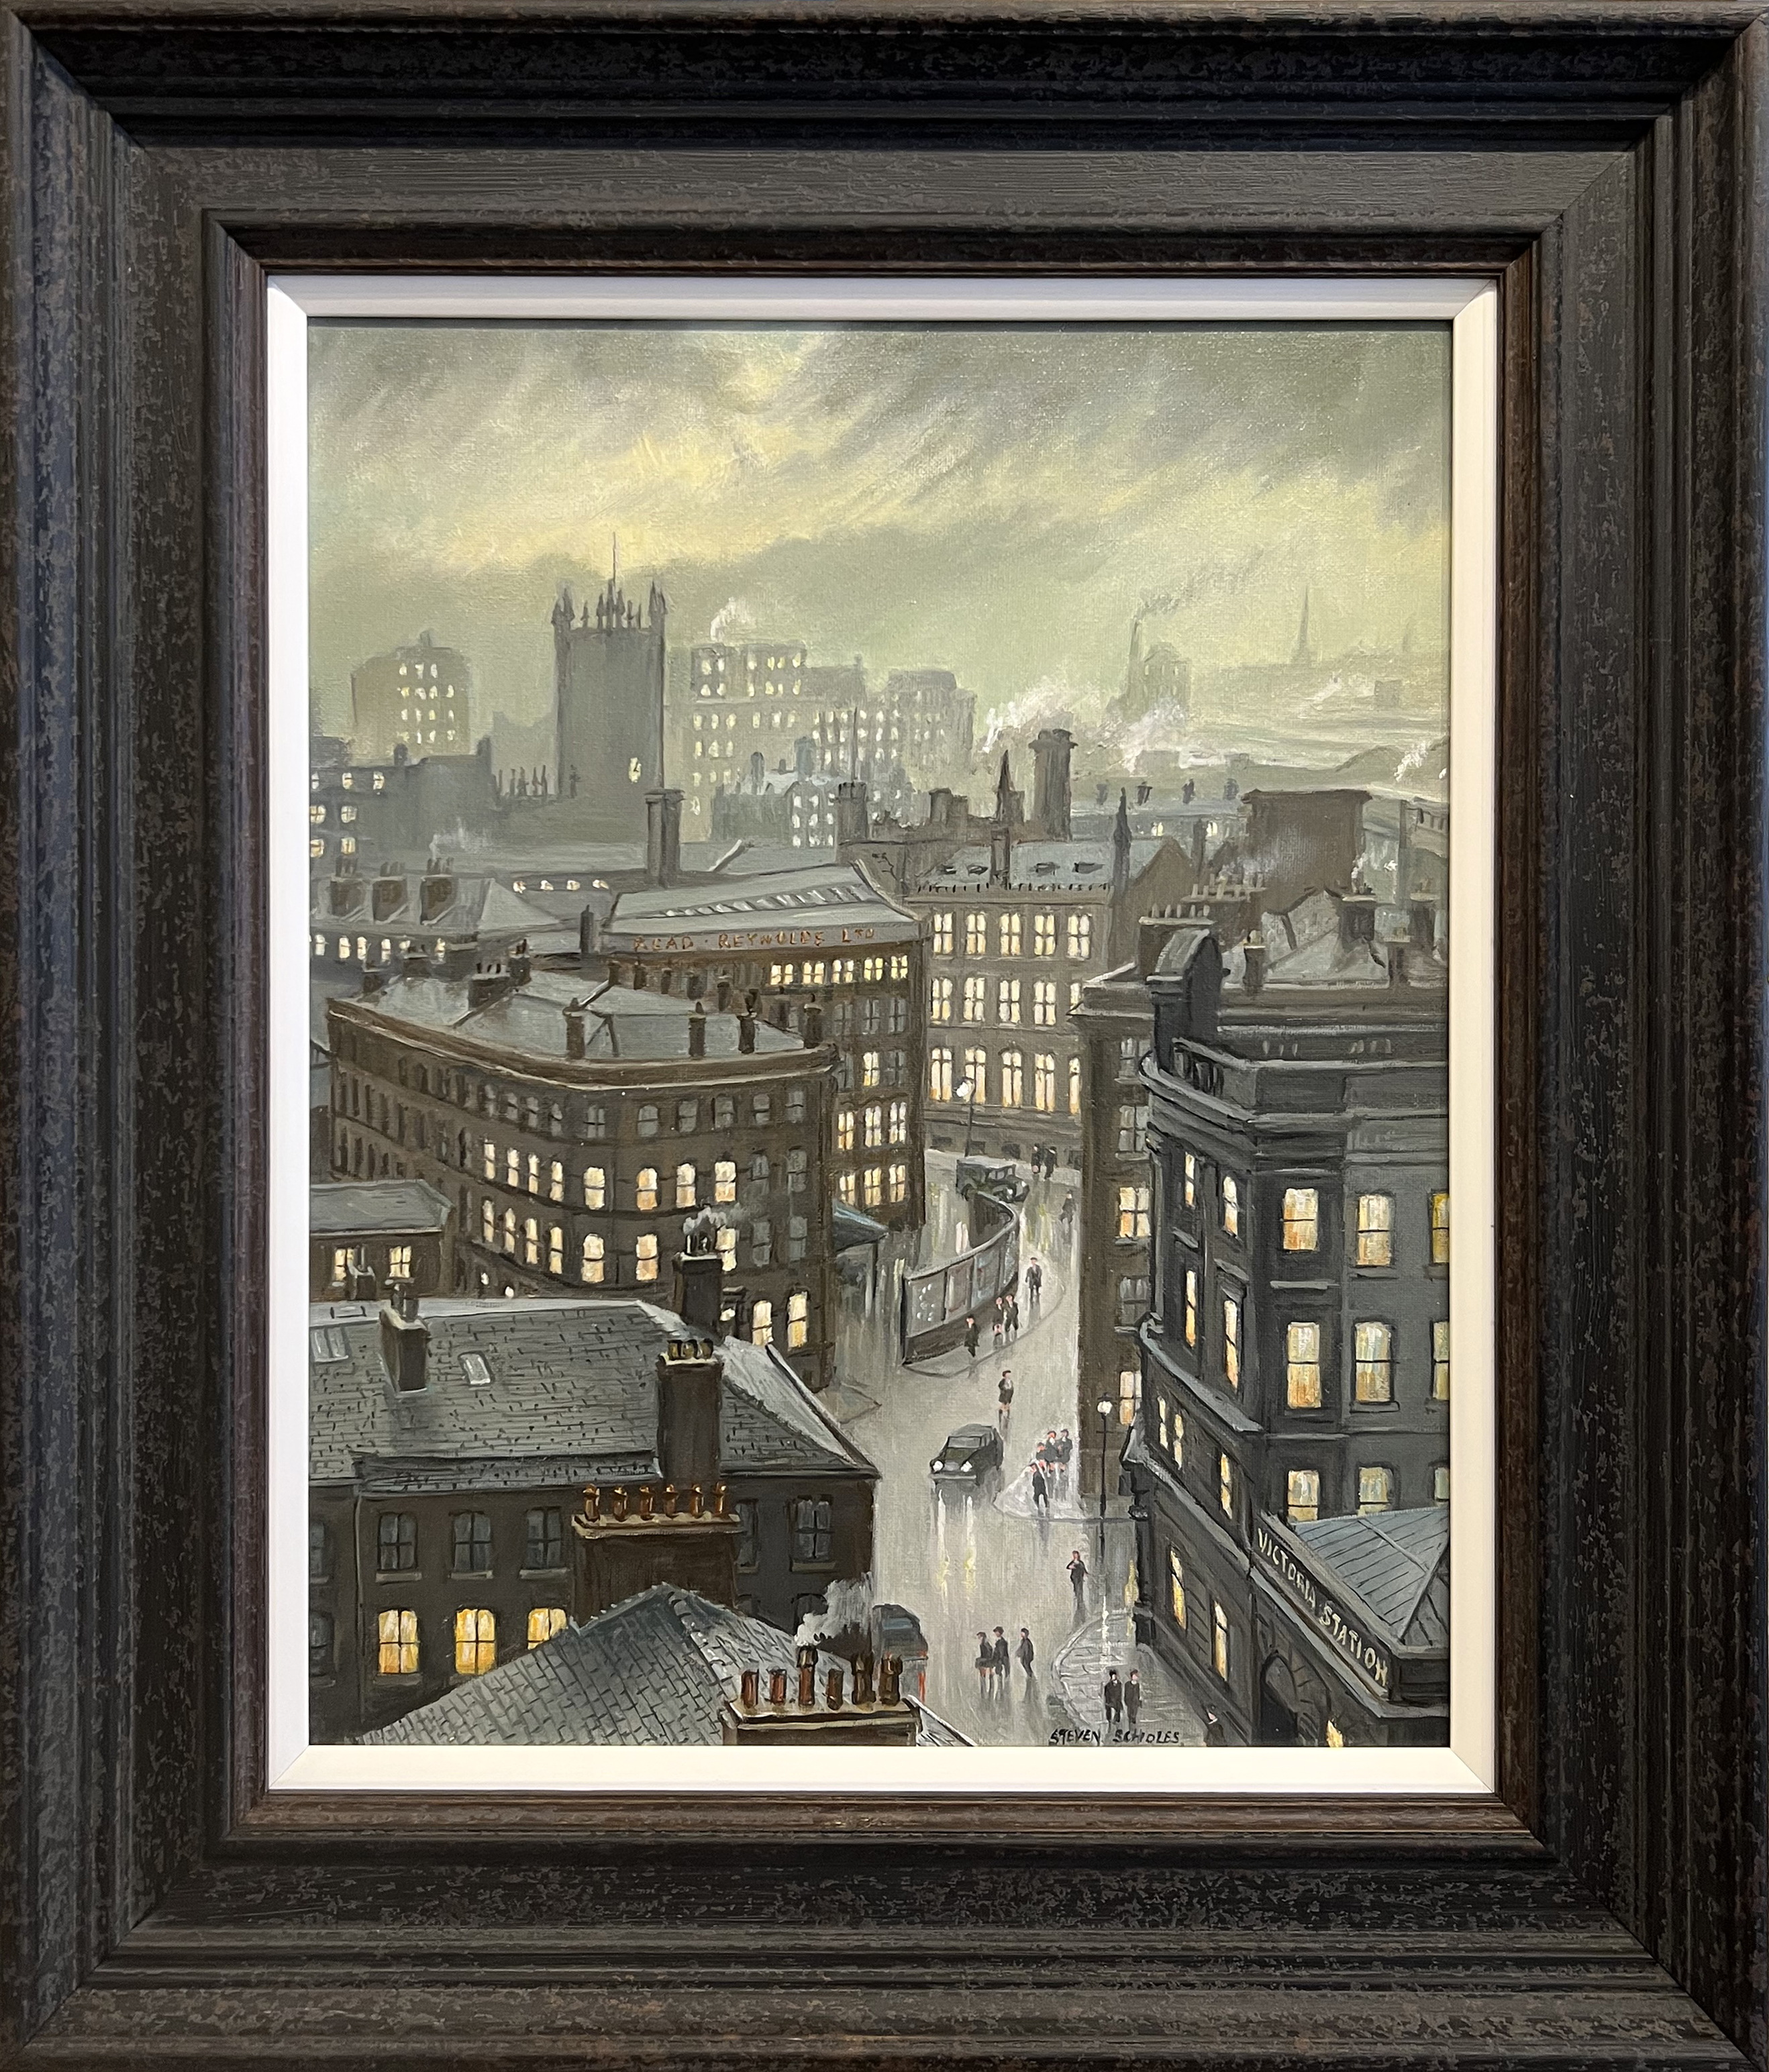 Steven Scholes Original Oil Painting, Manchester from Victoria Station 1958